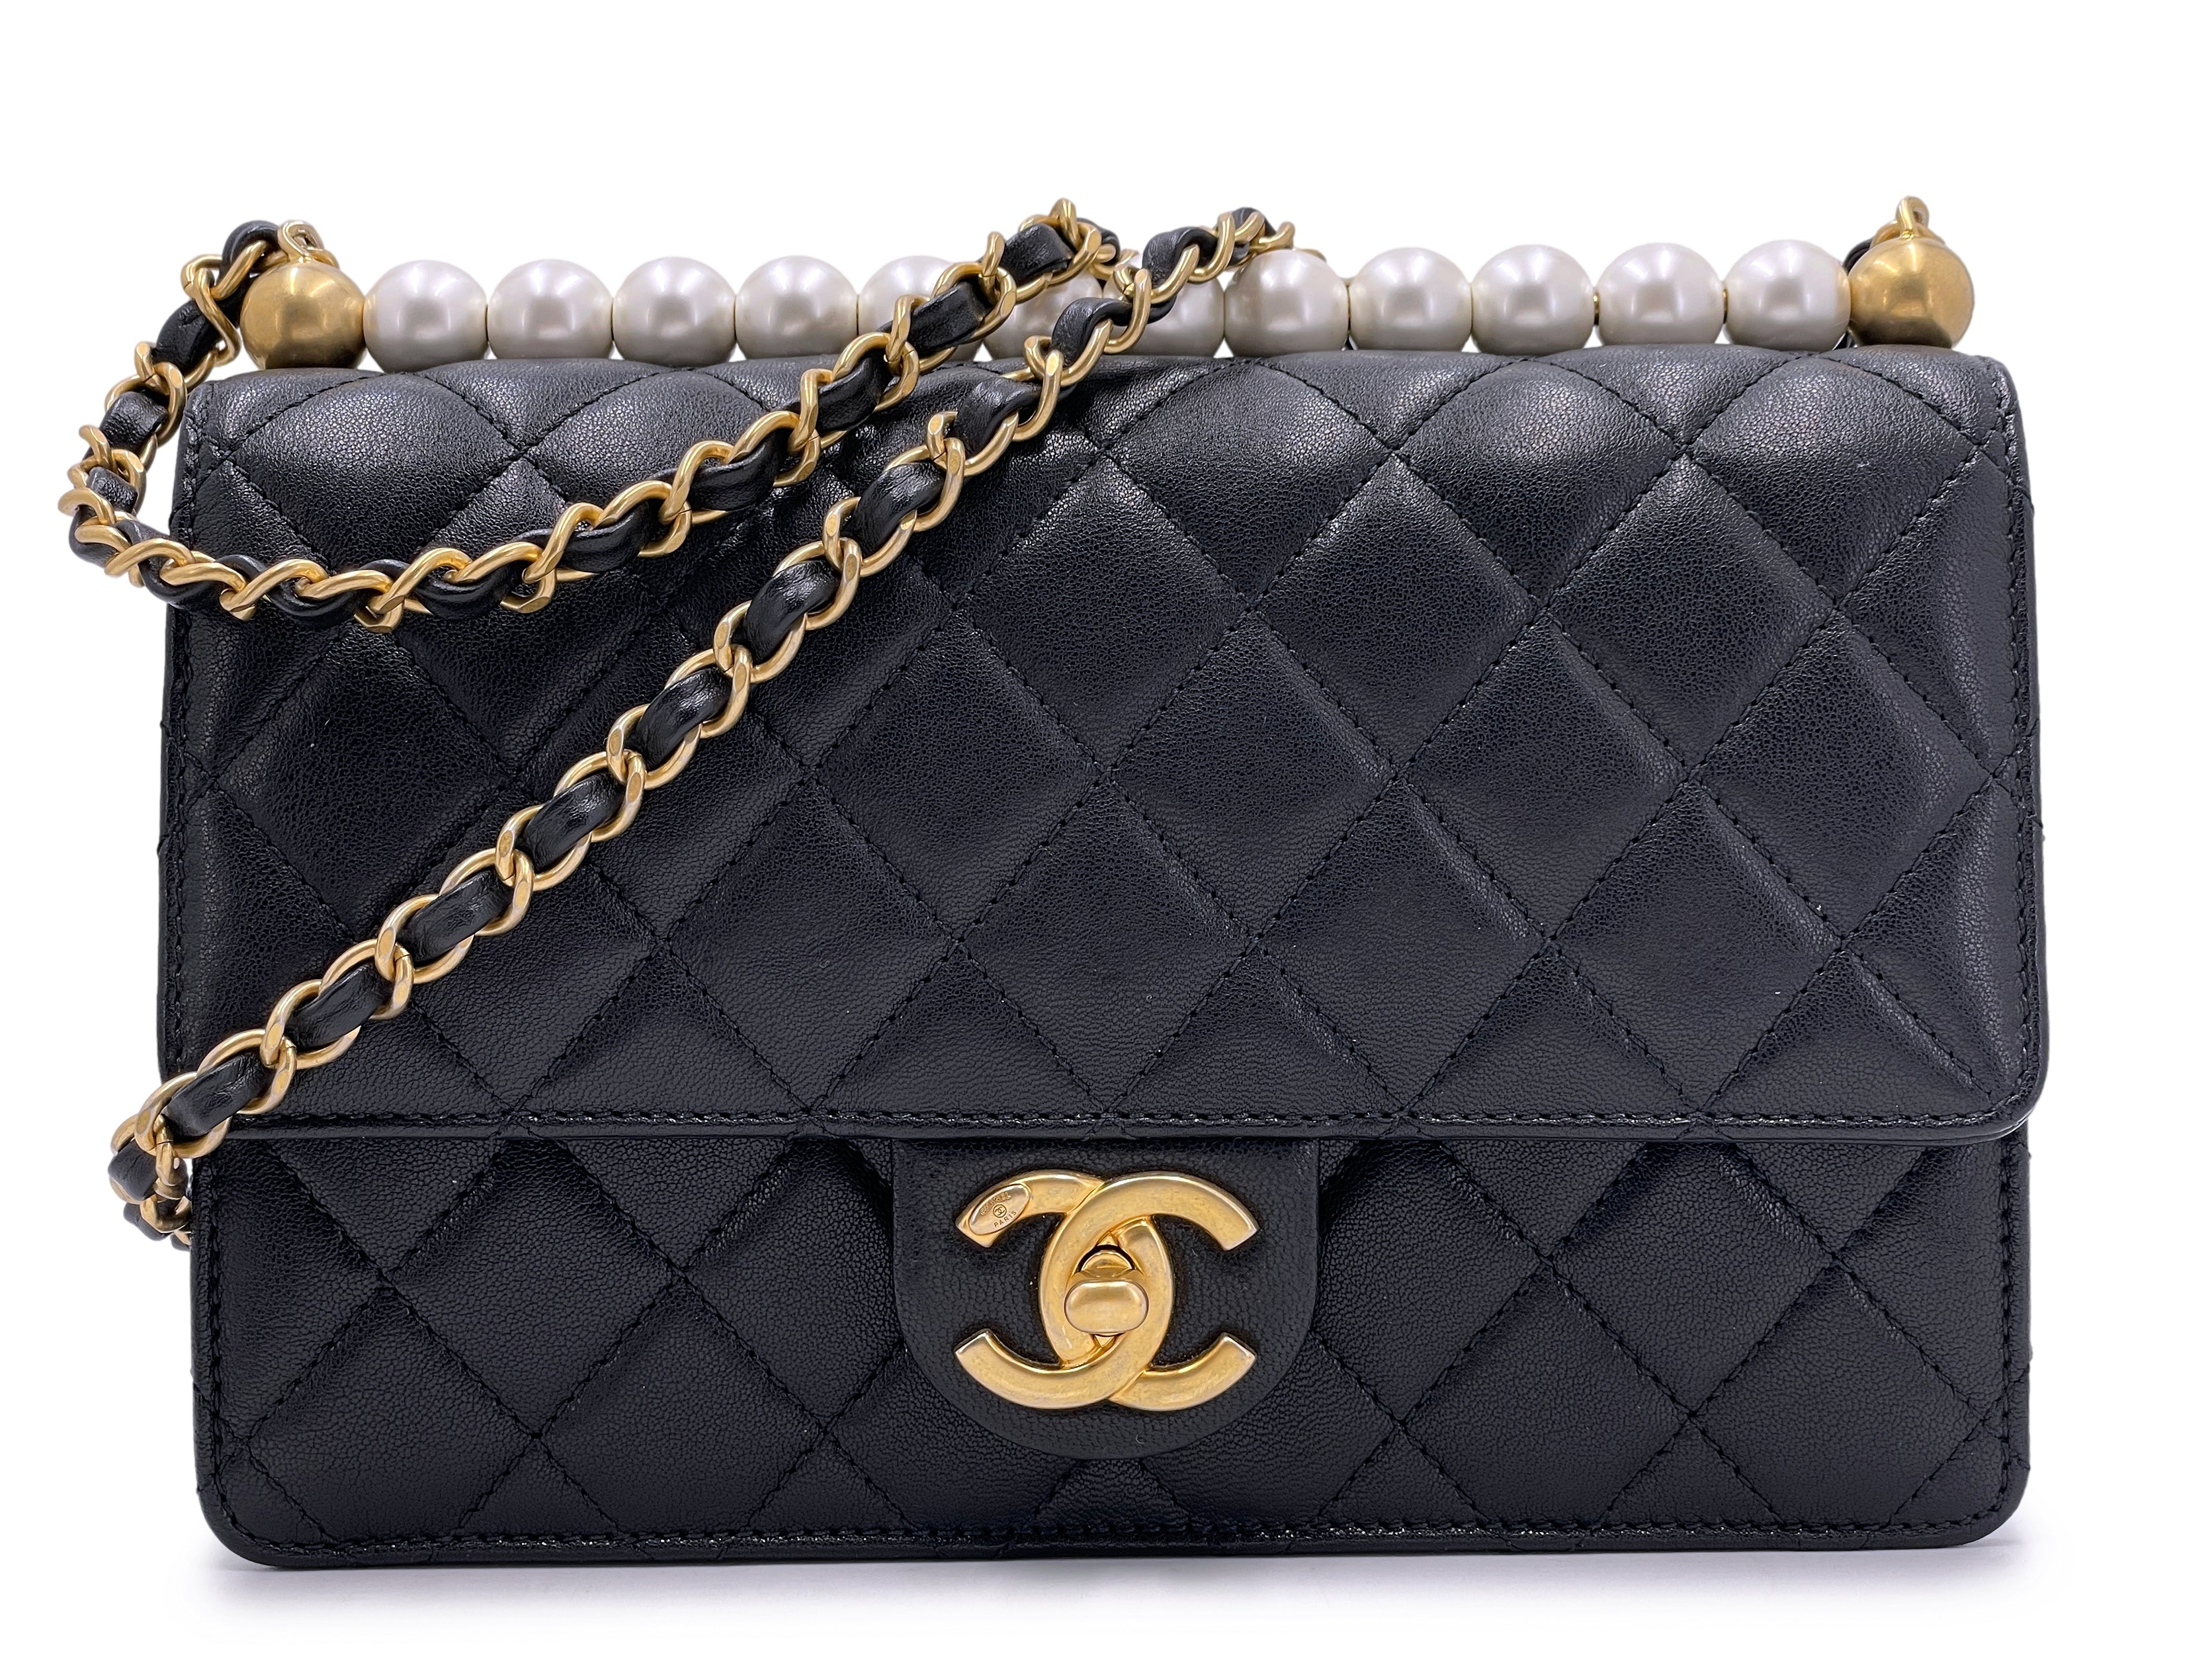 CHANEL, BLACK CHIC PEARLS SMALL FLAP BAG IN GOATSKIN LEATHER WITH MATTE  GOLD HARDWARE, Handbags & Accessories, 2020